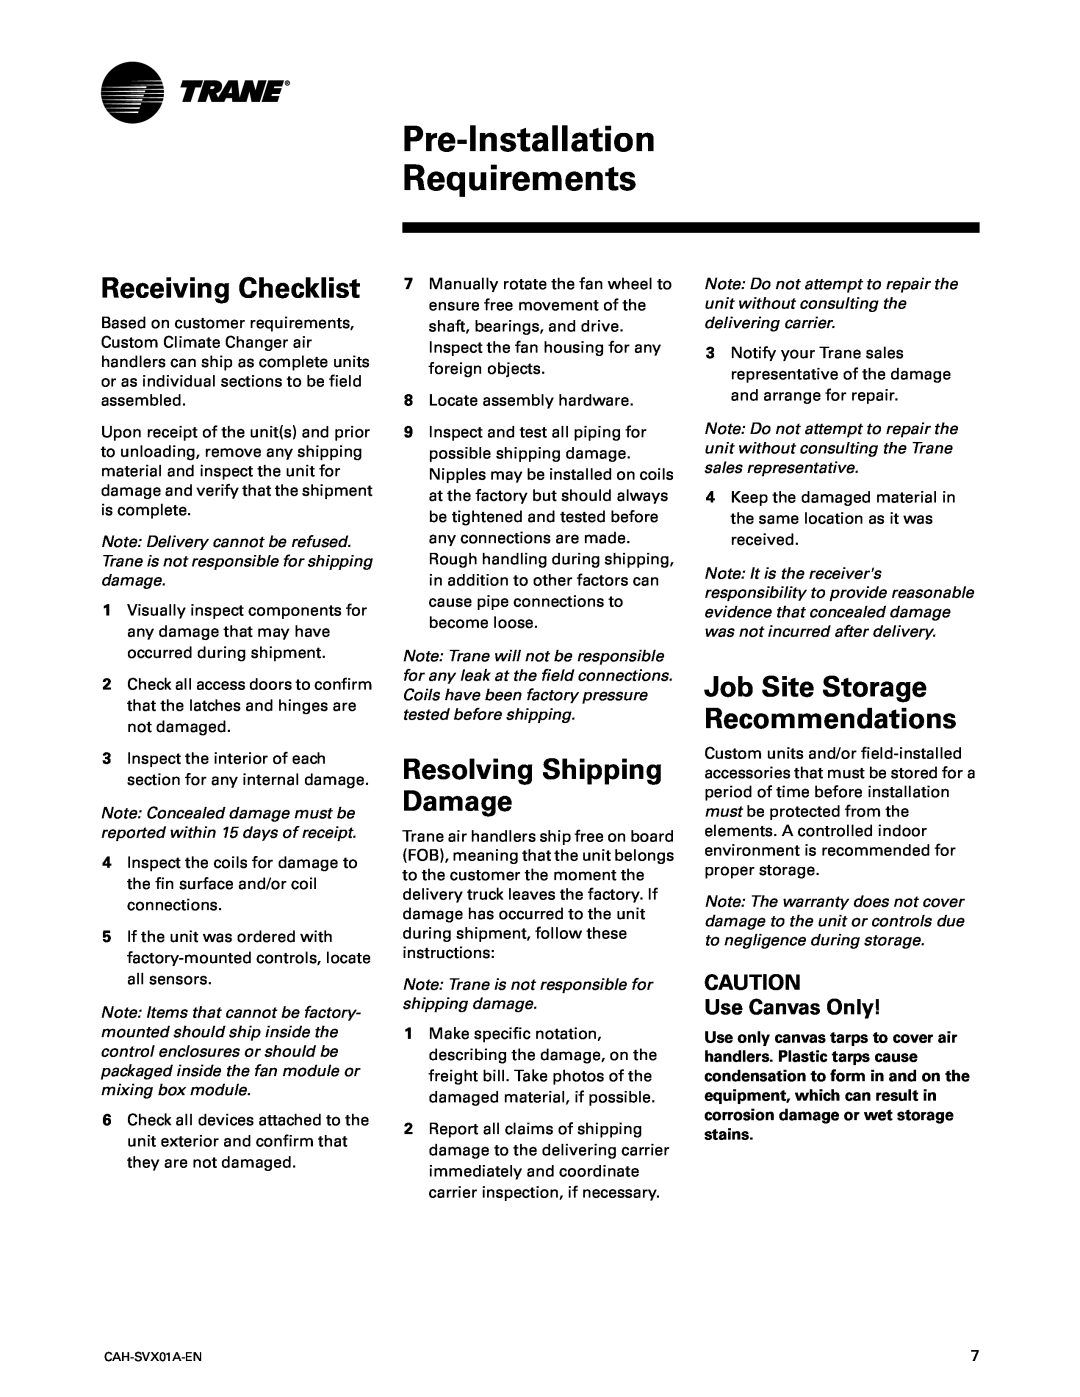 Trane Custom Climate Changer Air Handlers Pre-InstallationRequirements, Receiving Checklist, Resolving Shipping Damage 